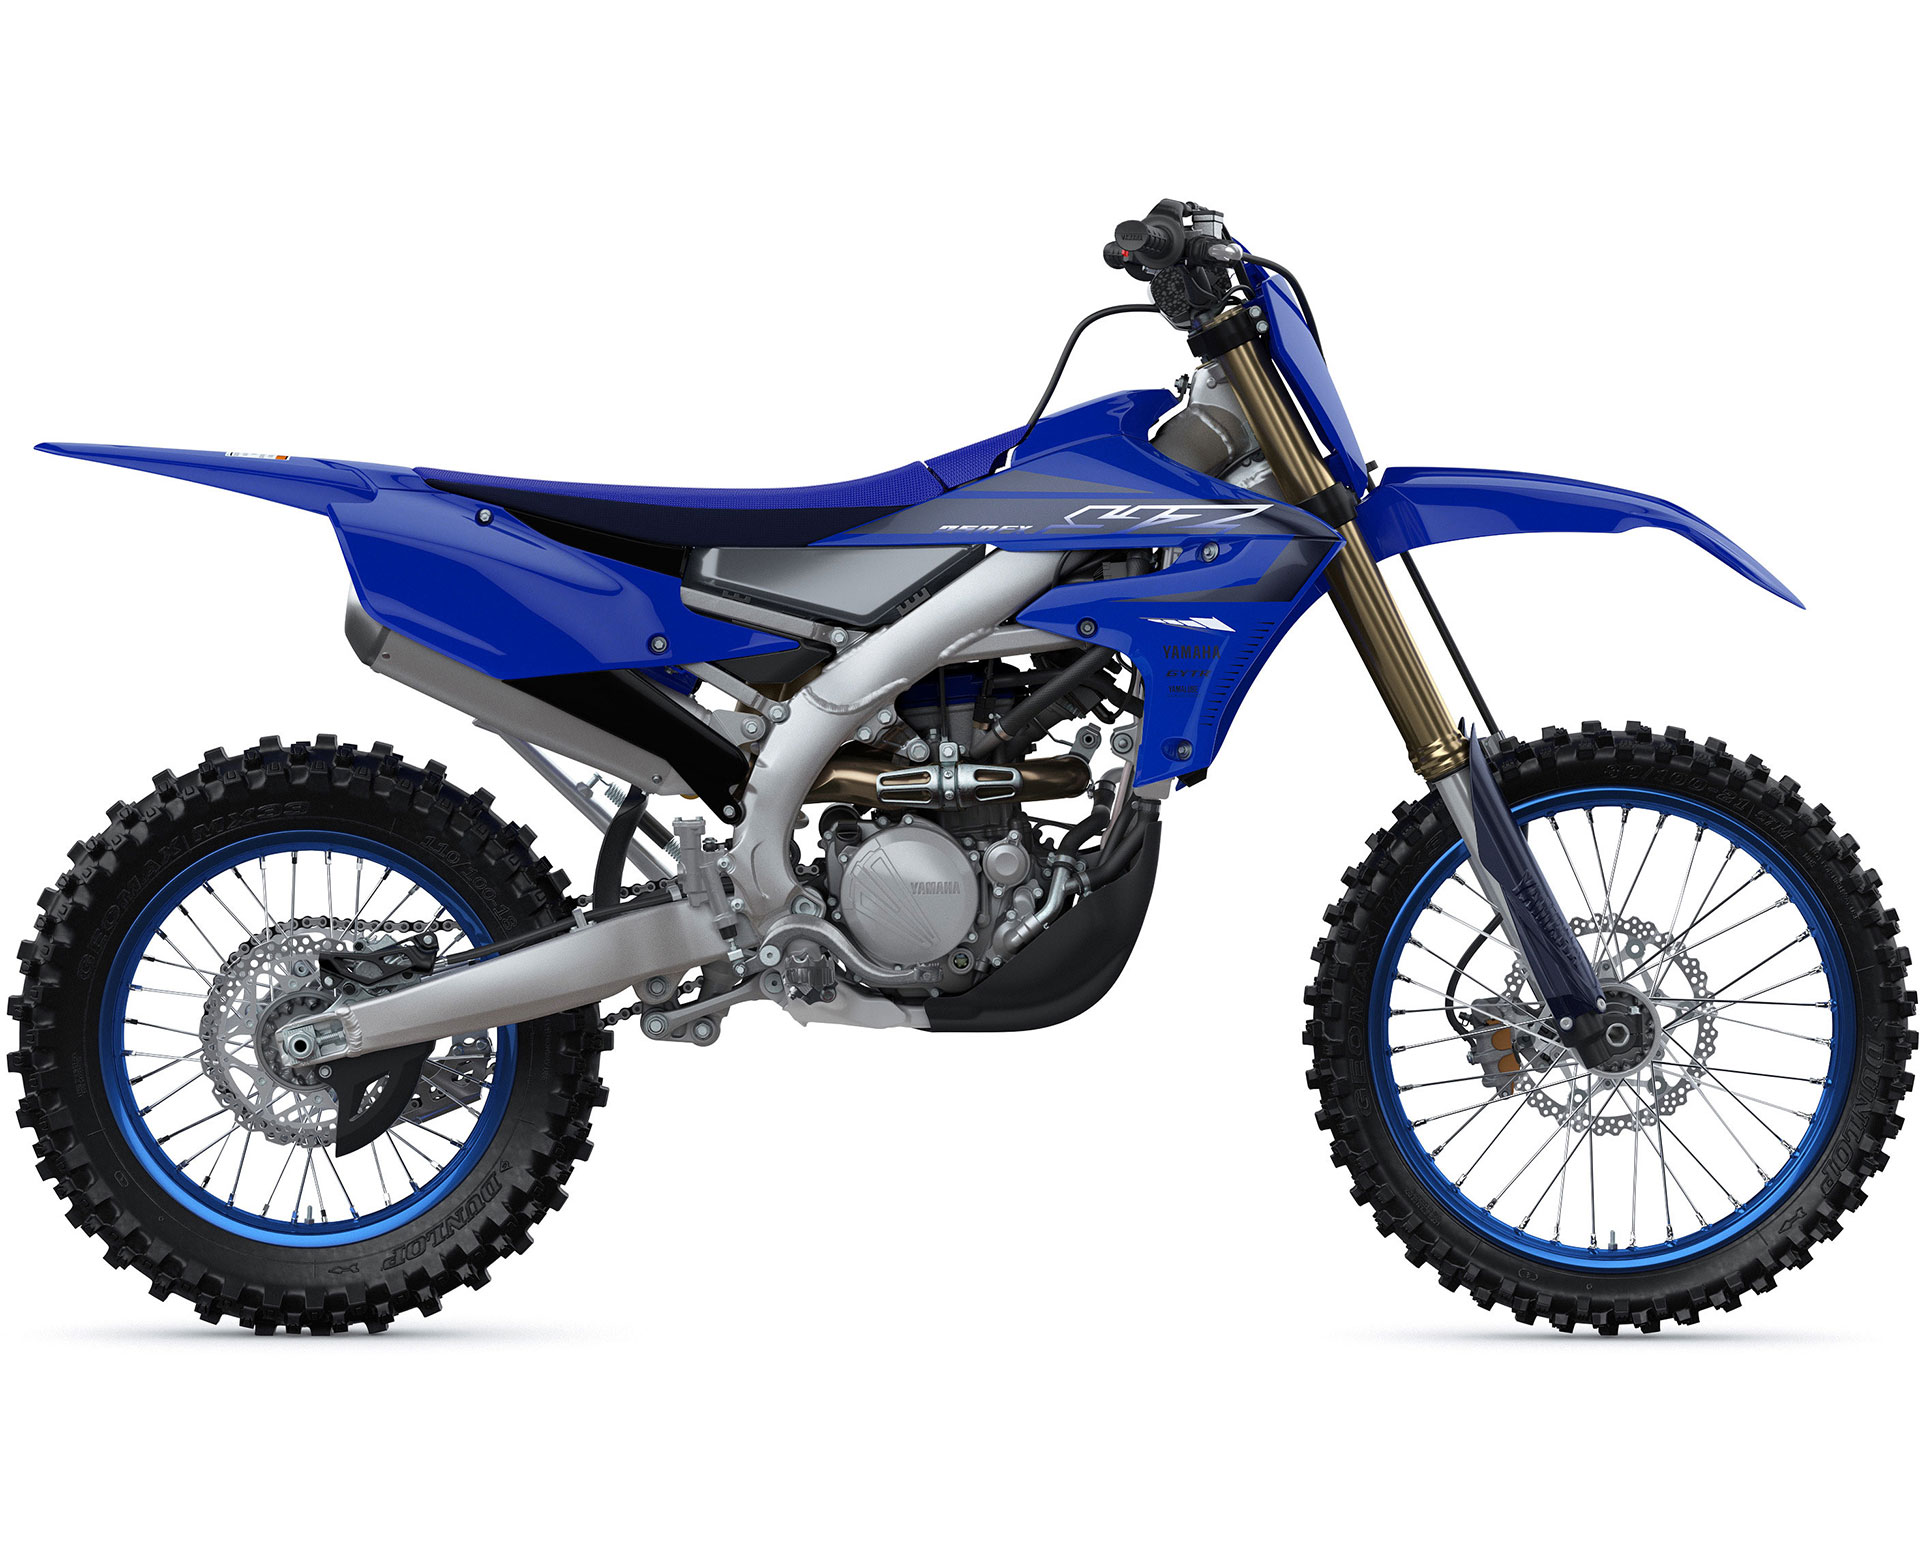 Thumbnail of your customized YZ250FX 2023